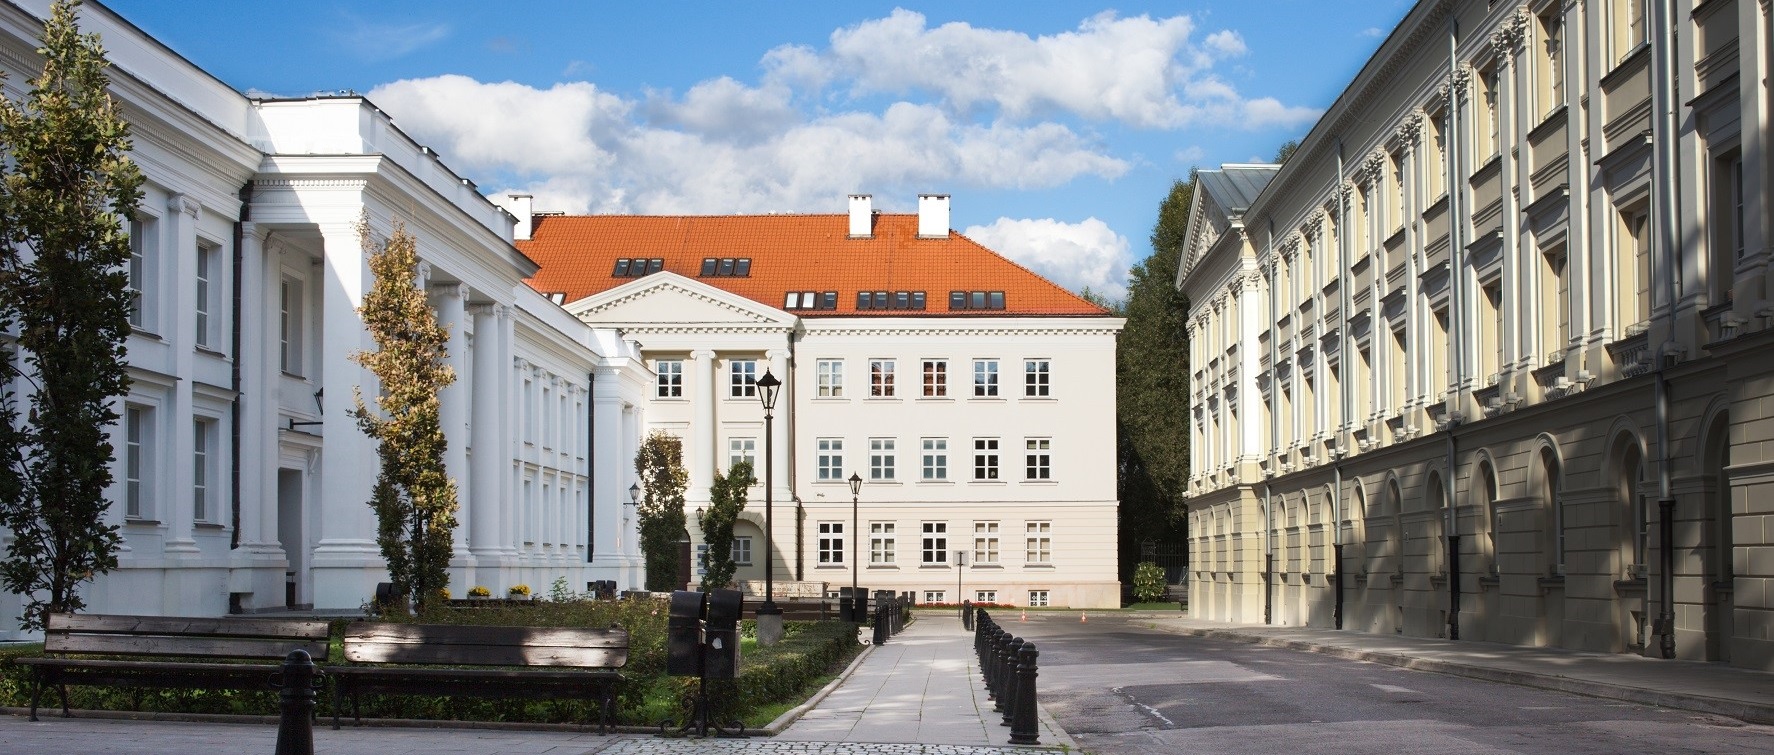 The Main Campus of the University of Warsaw, photo: J.Grabek